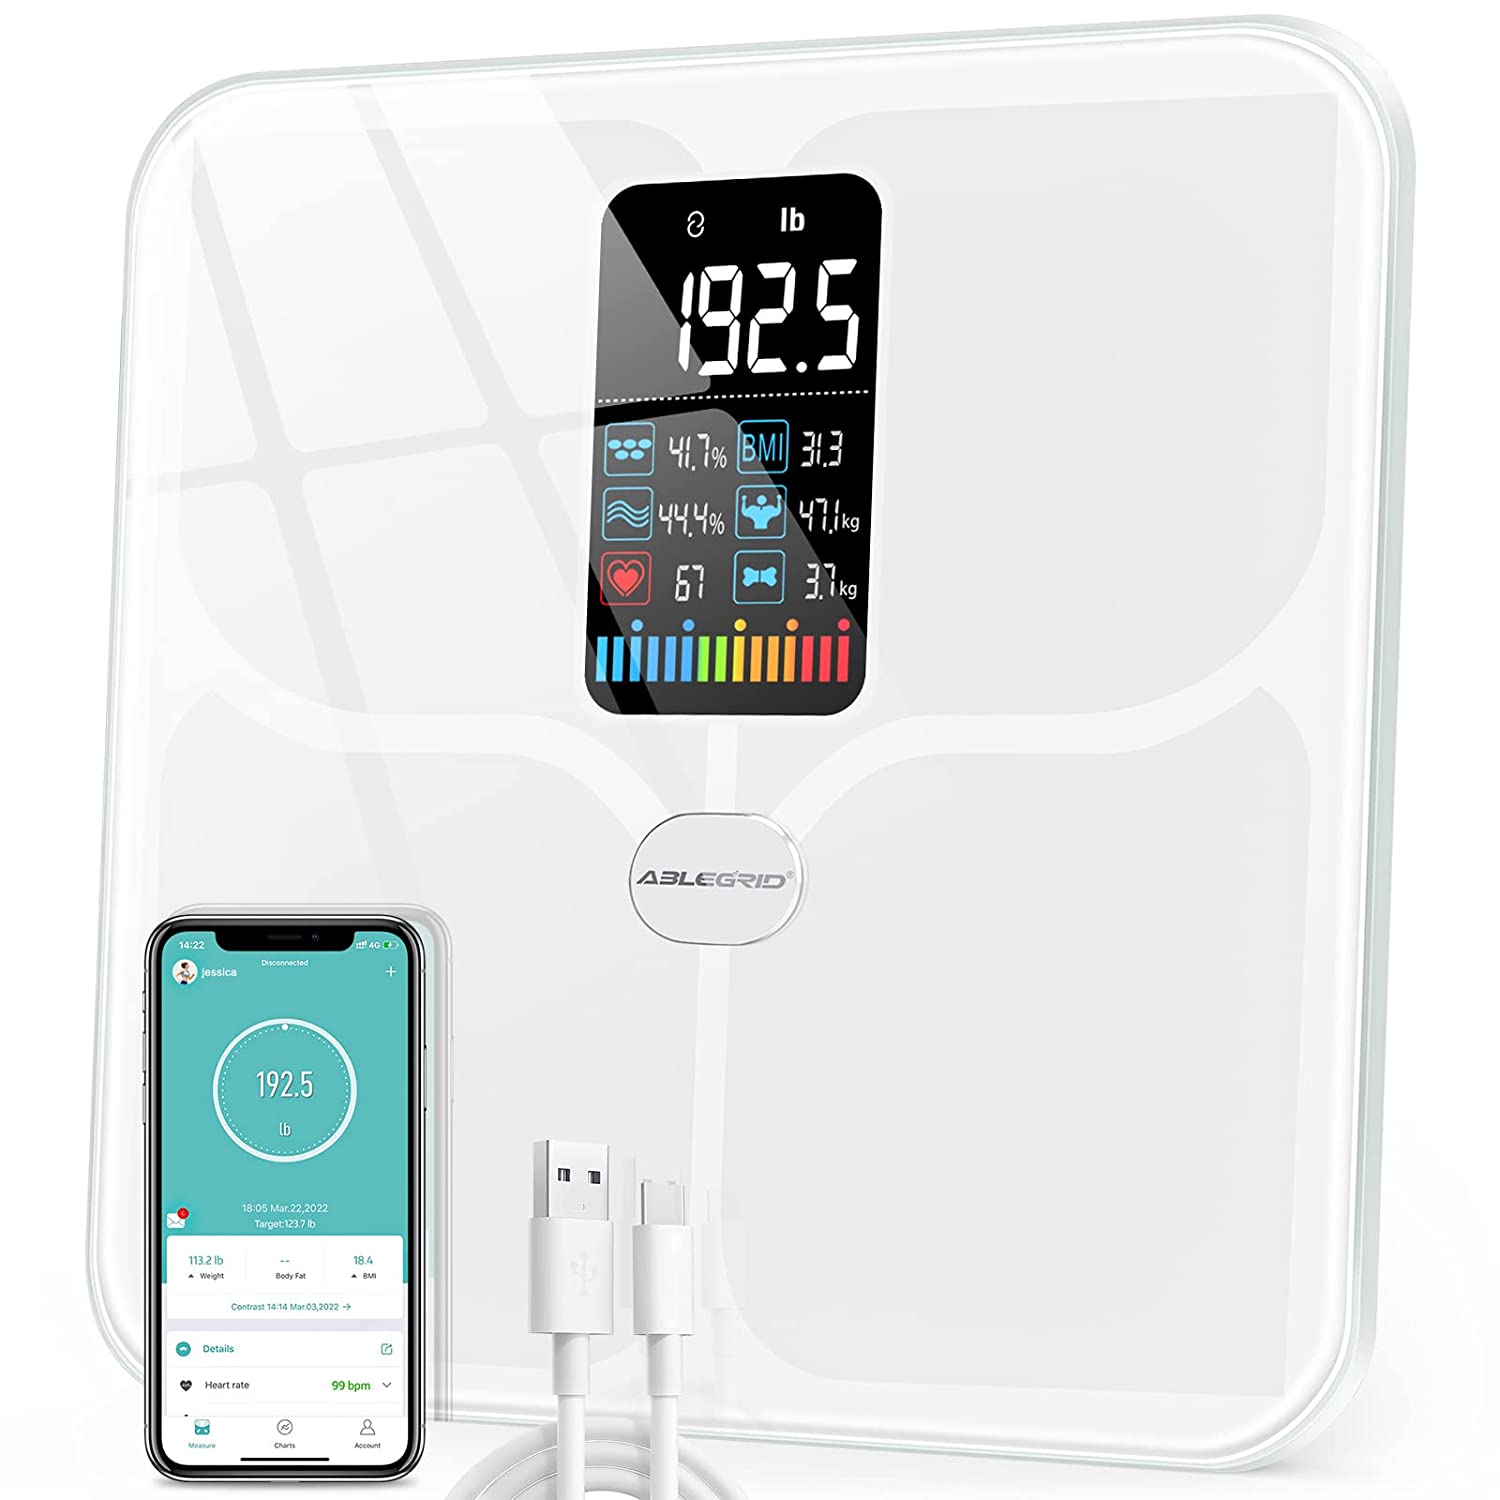 Etekcity Scales for Body Weight, Bathroom Digital Weight and Body Fat Scale for BMI, Rechargeable Smart Bluetooth Body Compos